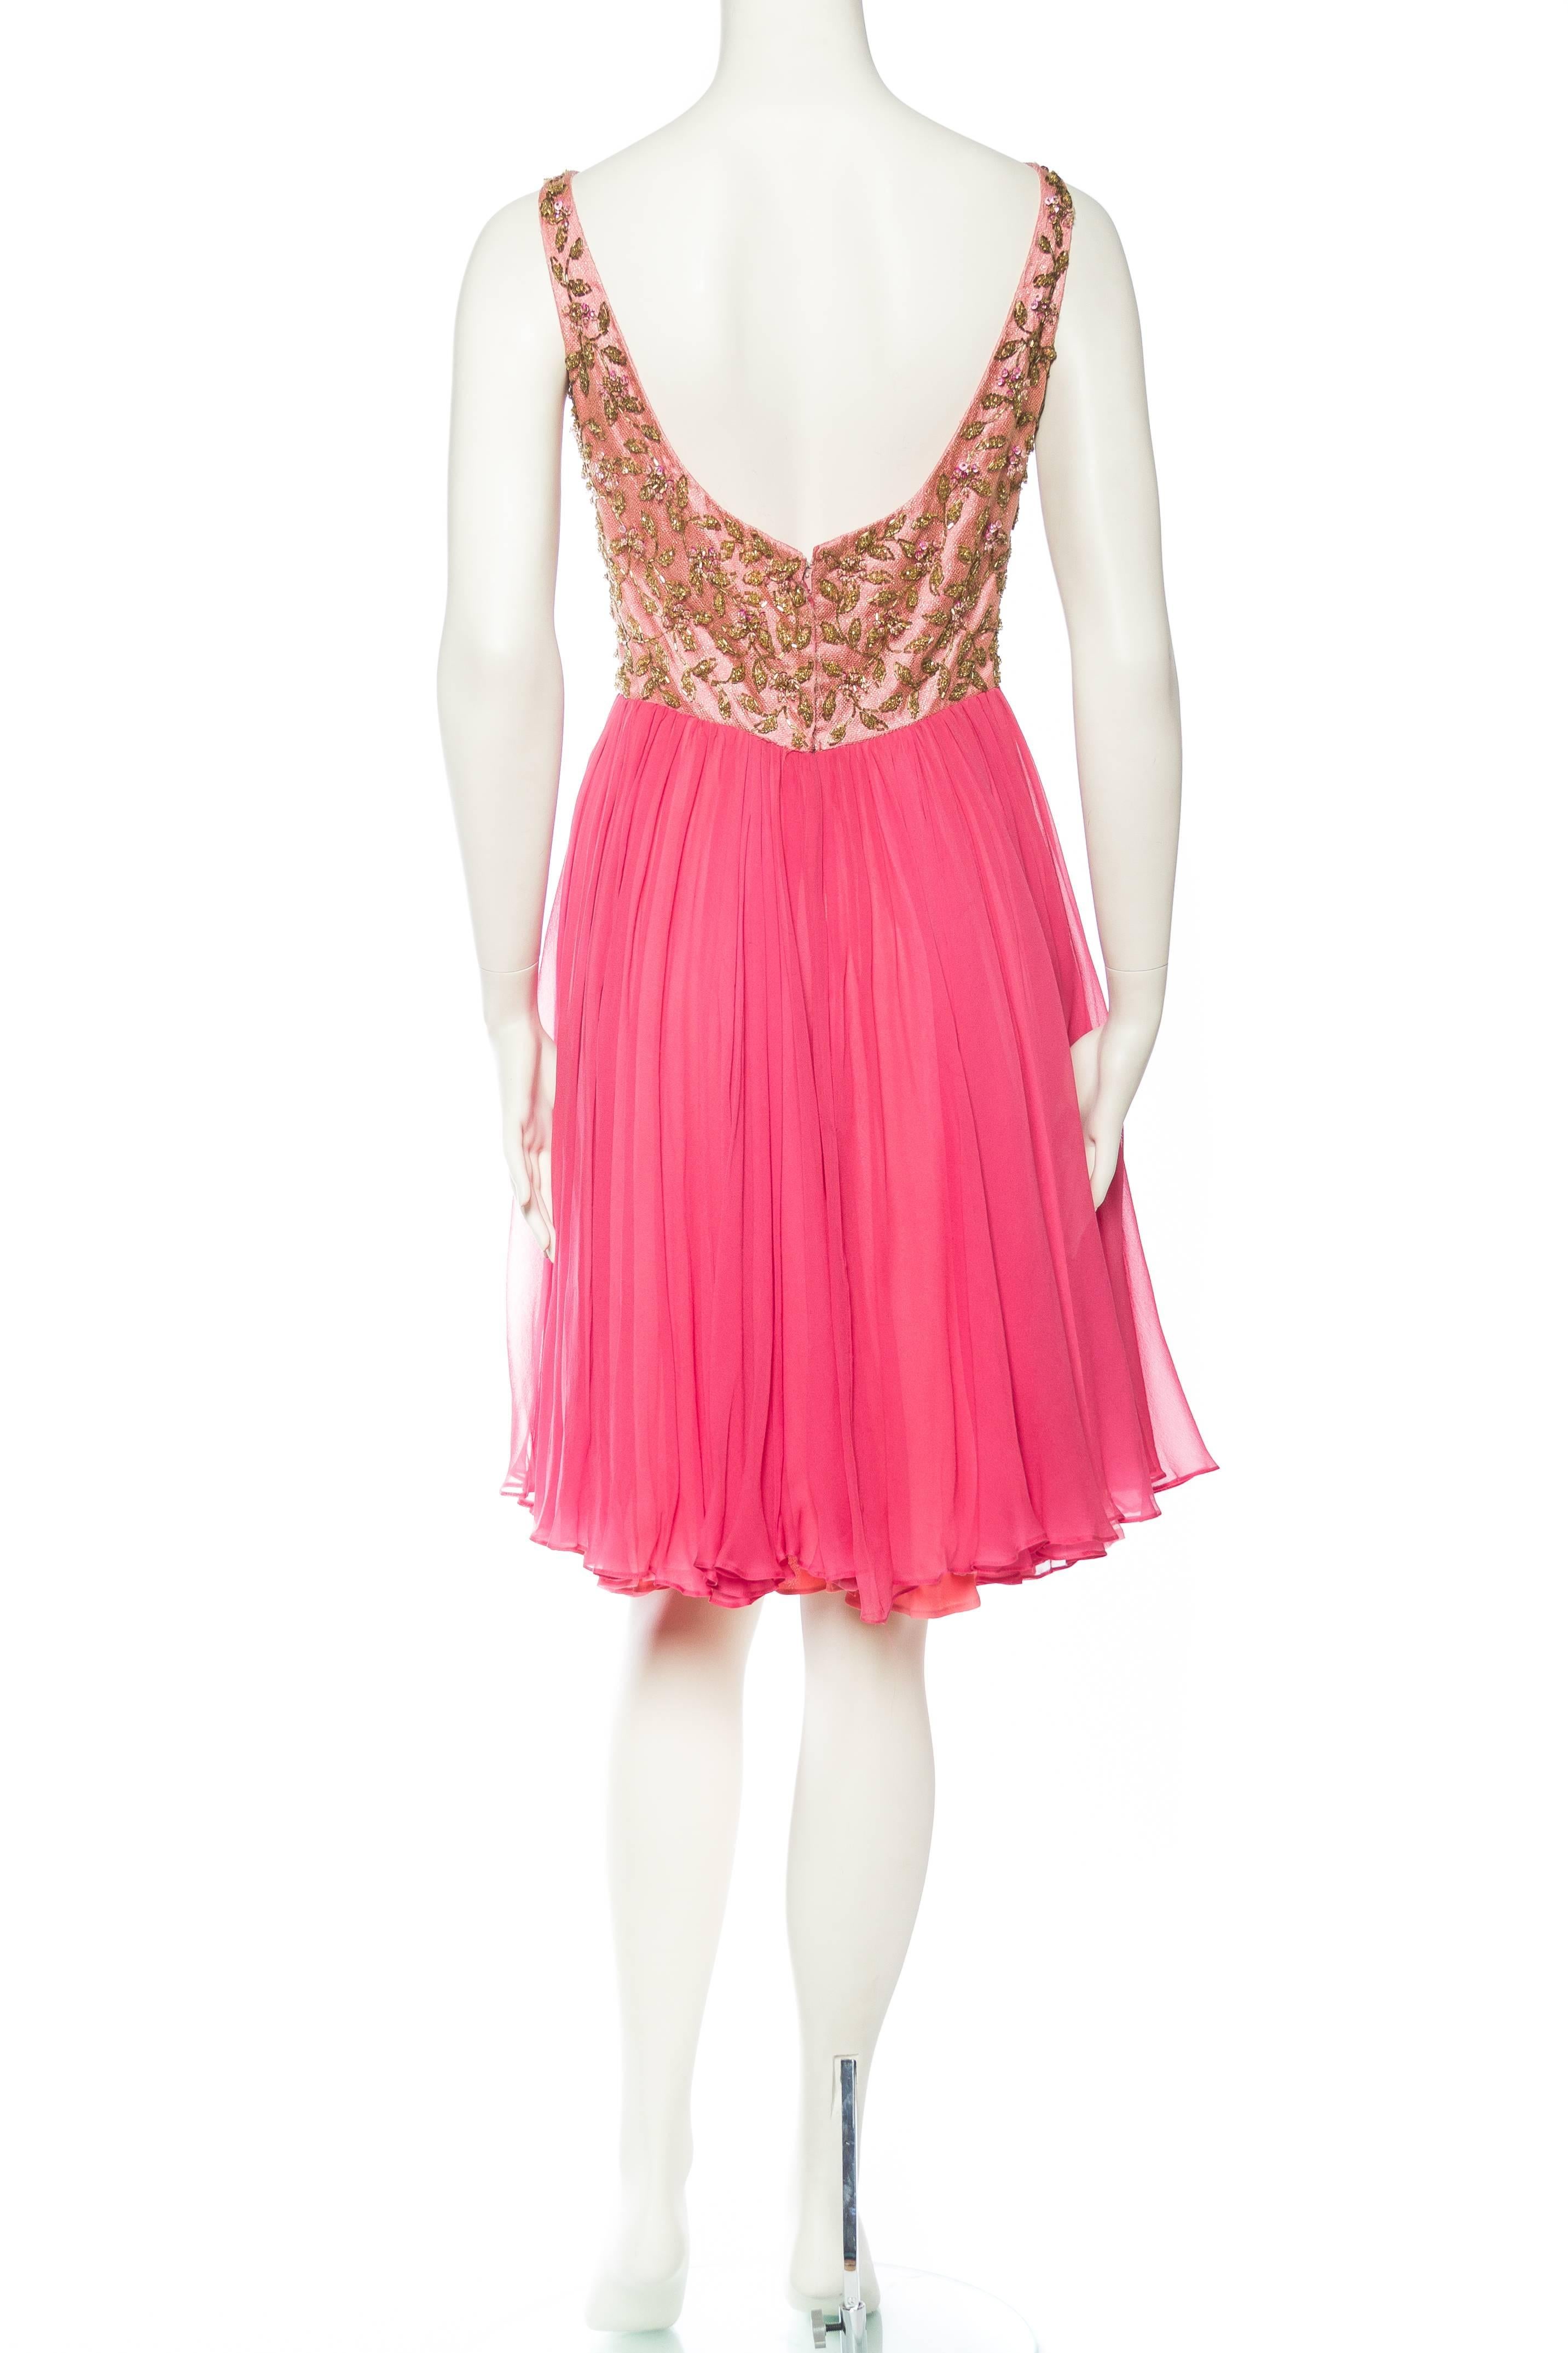 Women's 1960S Pink & Gold Silk Chiffon Beaded Swing Skirt Party Cocktail Dress For Sale